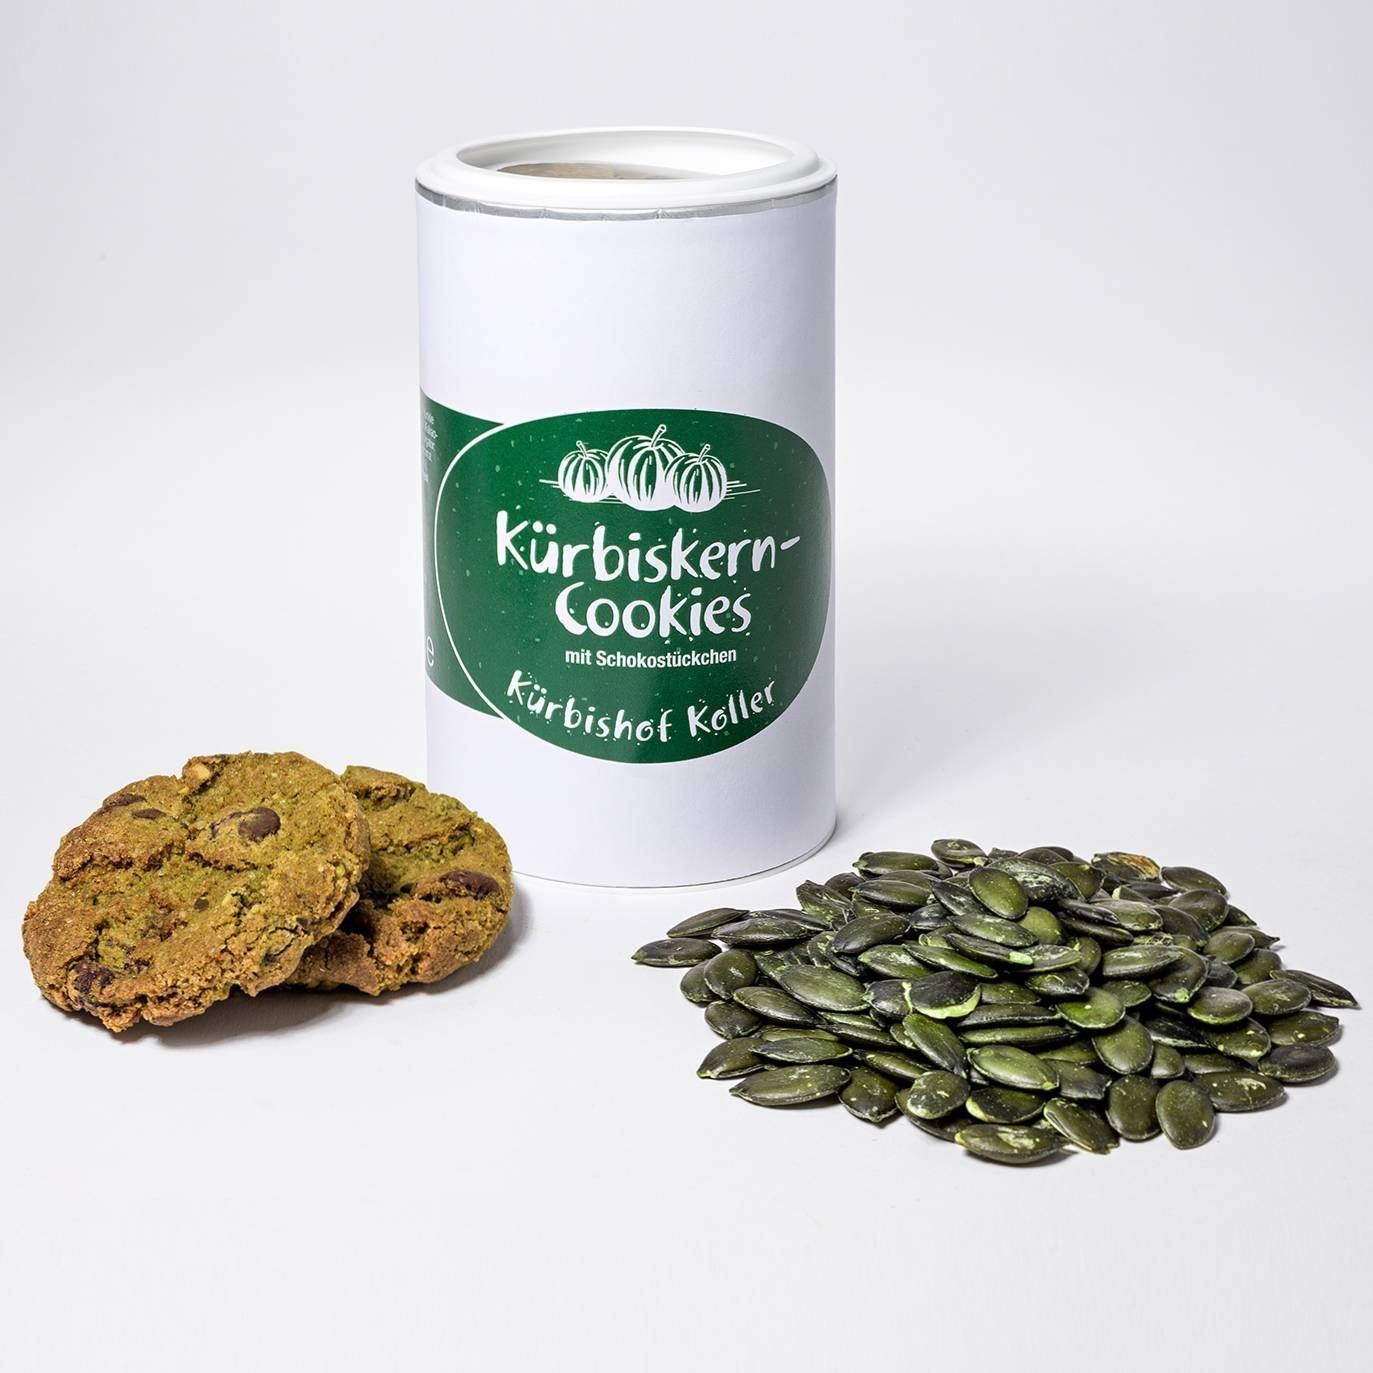 Pumpkin Seed Cookies with Chocolate Chips in Lithuania